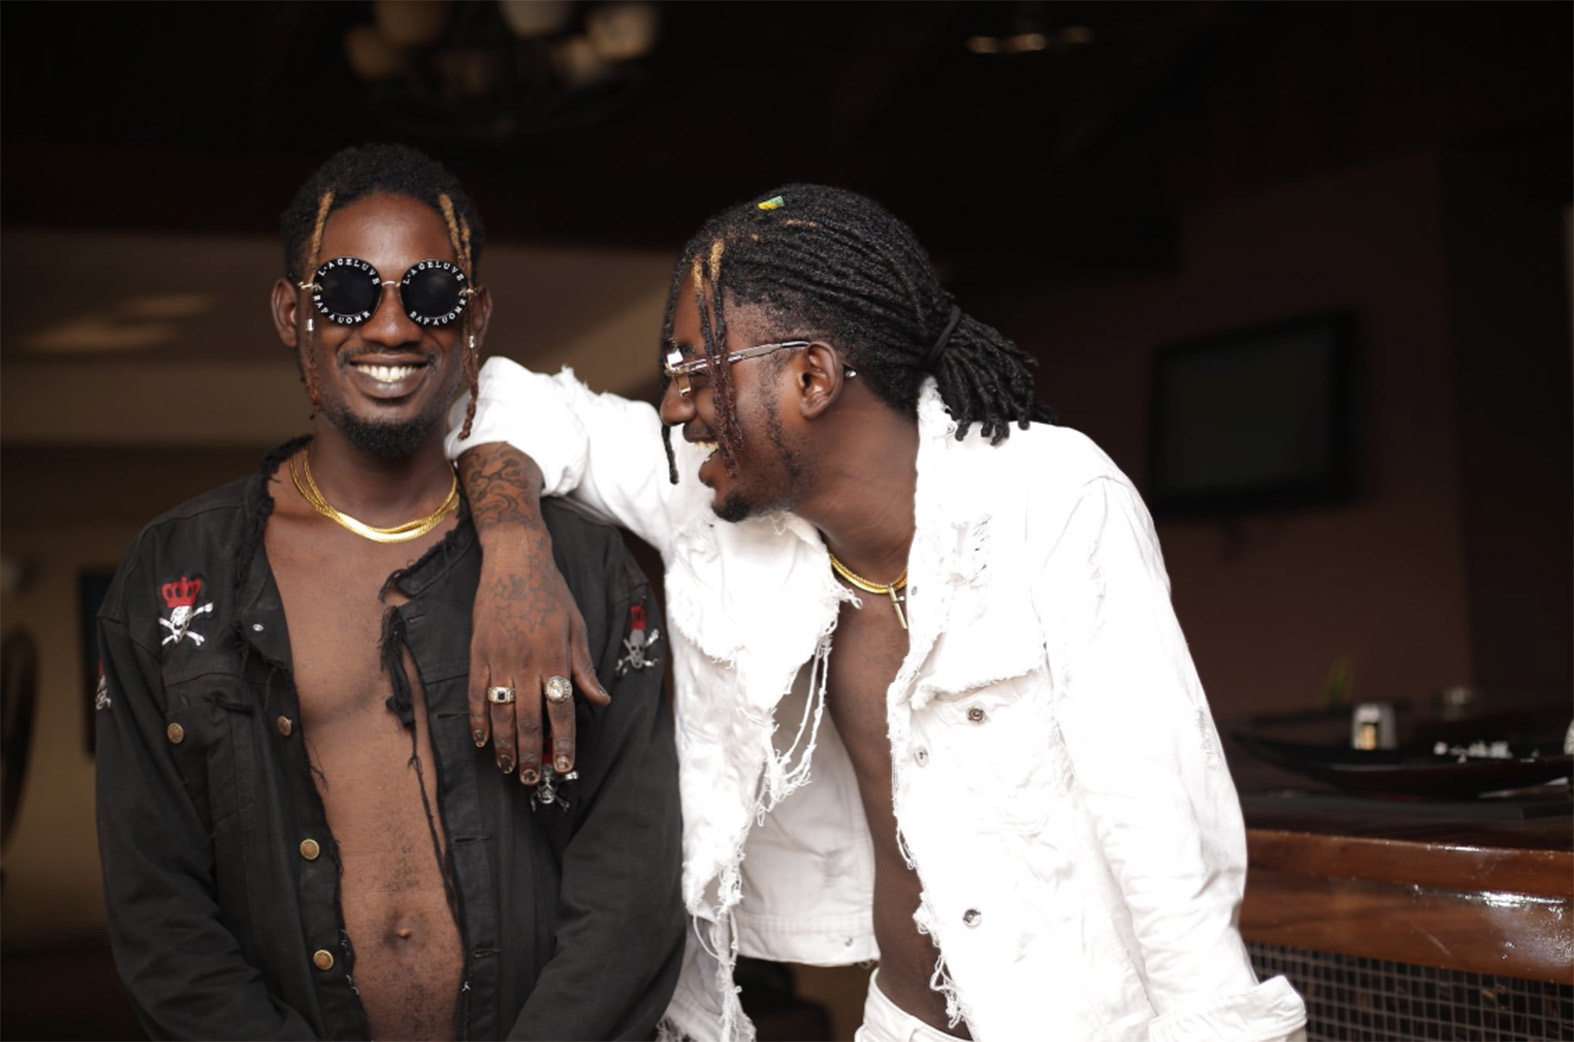 Get to know the new dancehall music twins 2iice